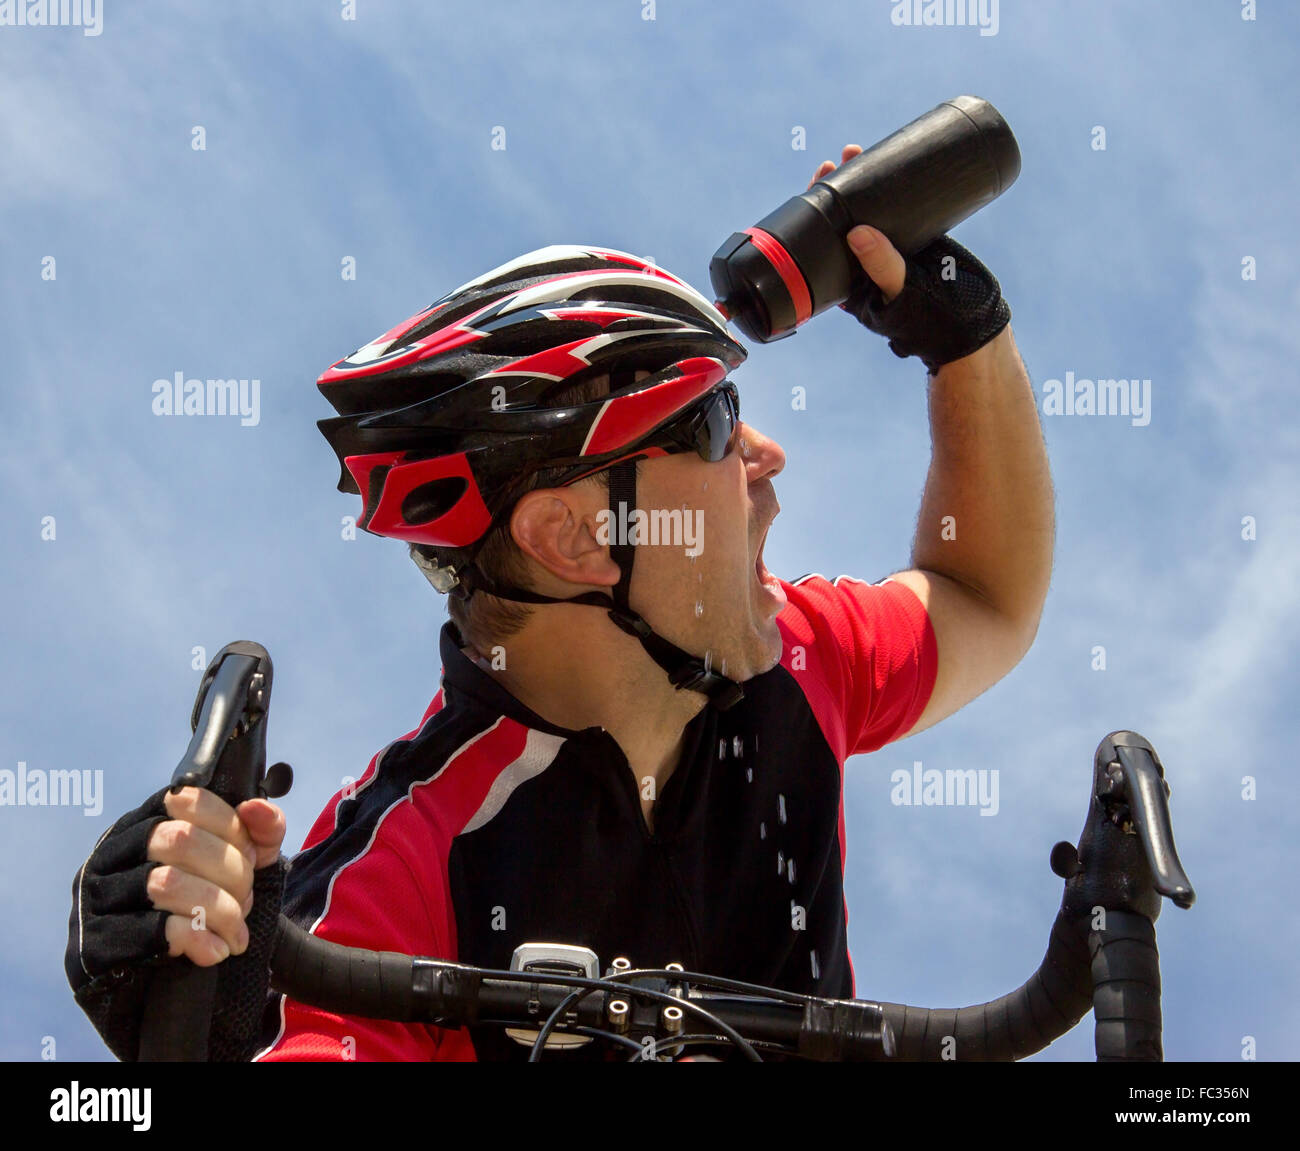 bicyclist cools his head while cycling on a bicycle Stock Photo